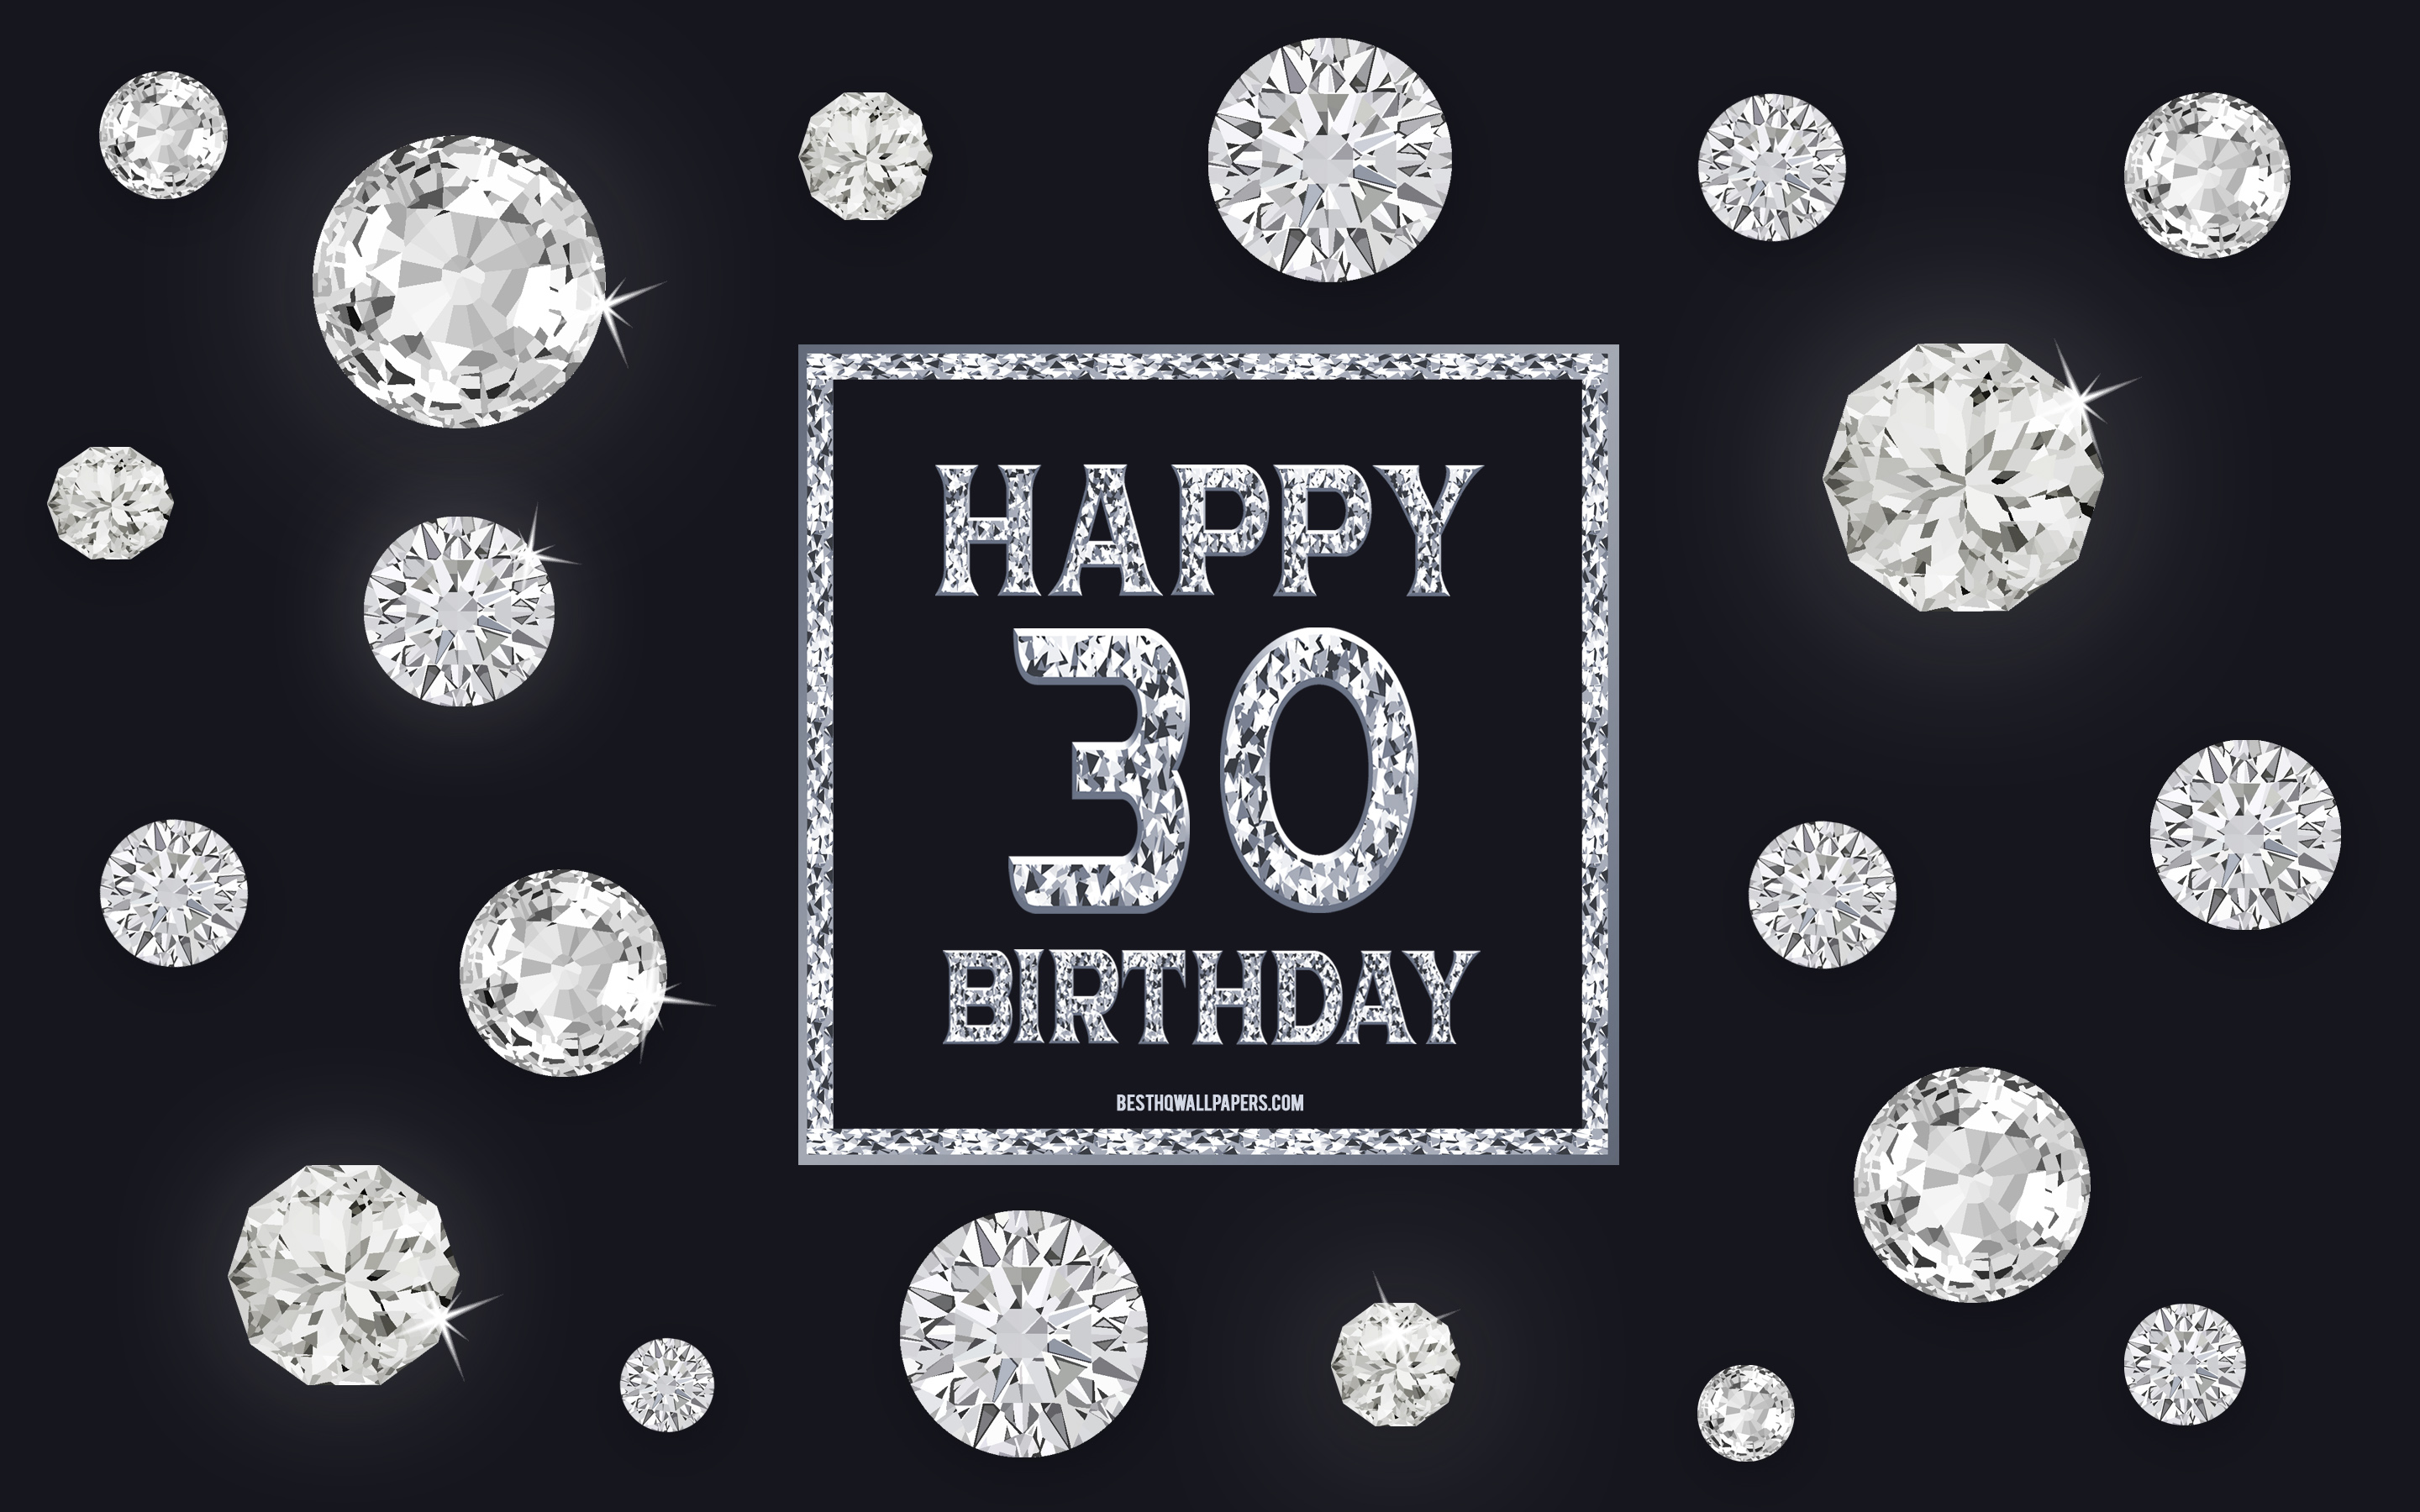 Download wallpaper 30th Happy Birthday, diamonds, gray background, Birthday background with gems, 30 Years Birthday, Happy 30th Birthday, creative art, Happy Birthday background for desktop with resolution 2880x1800. High Quality HD picture